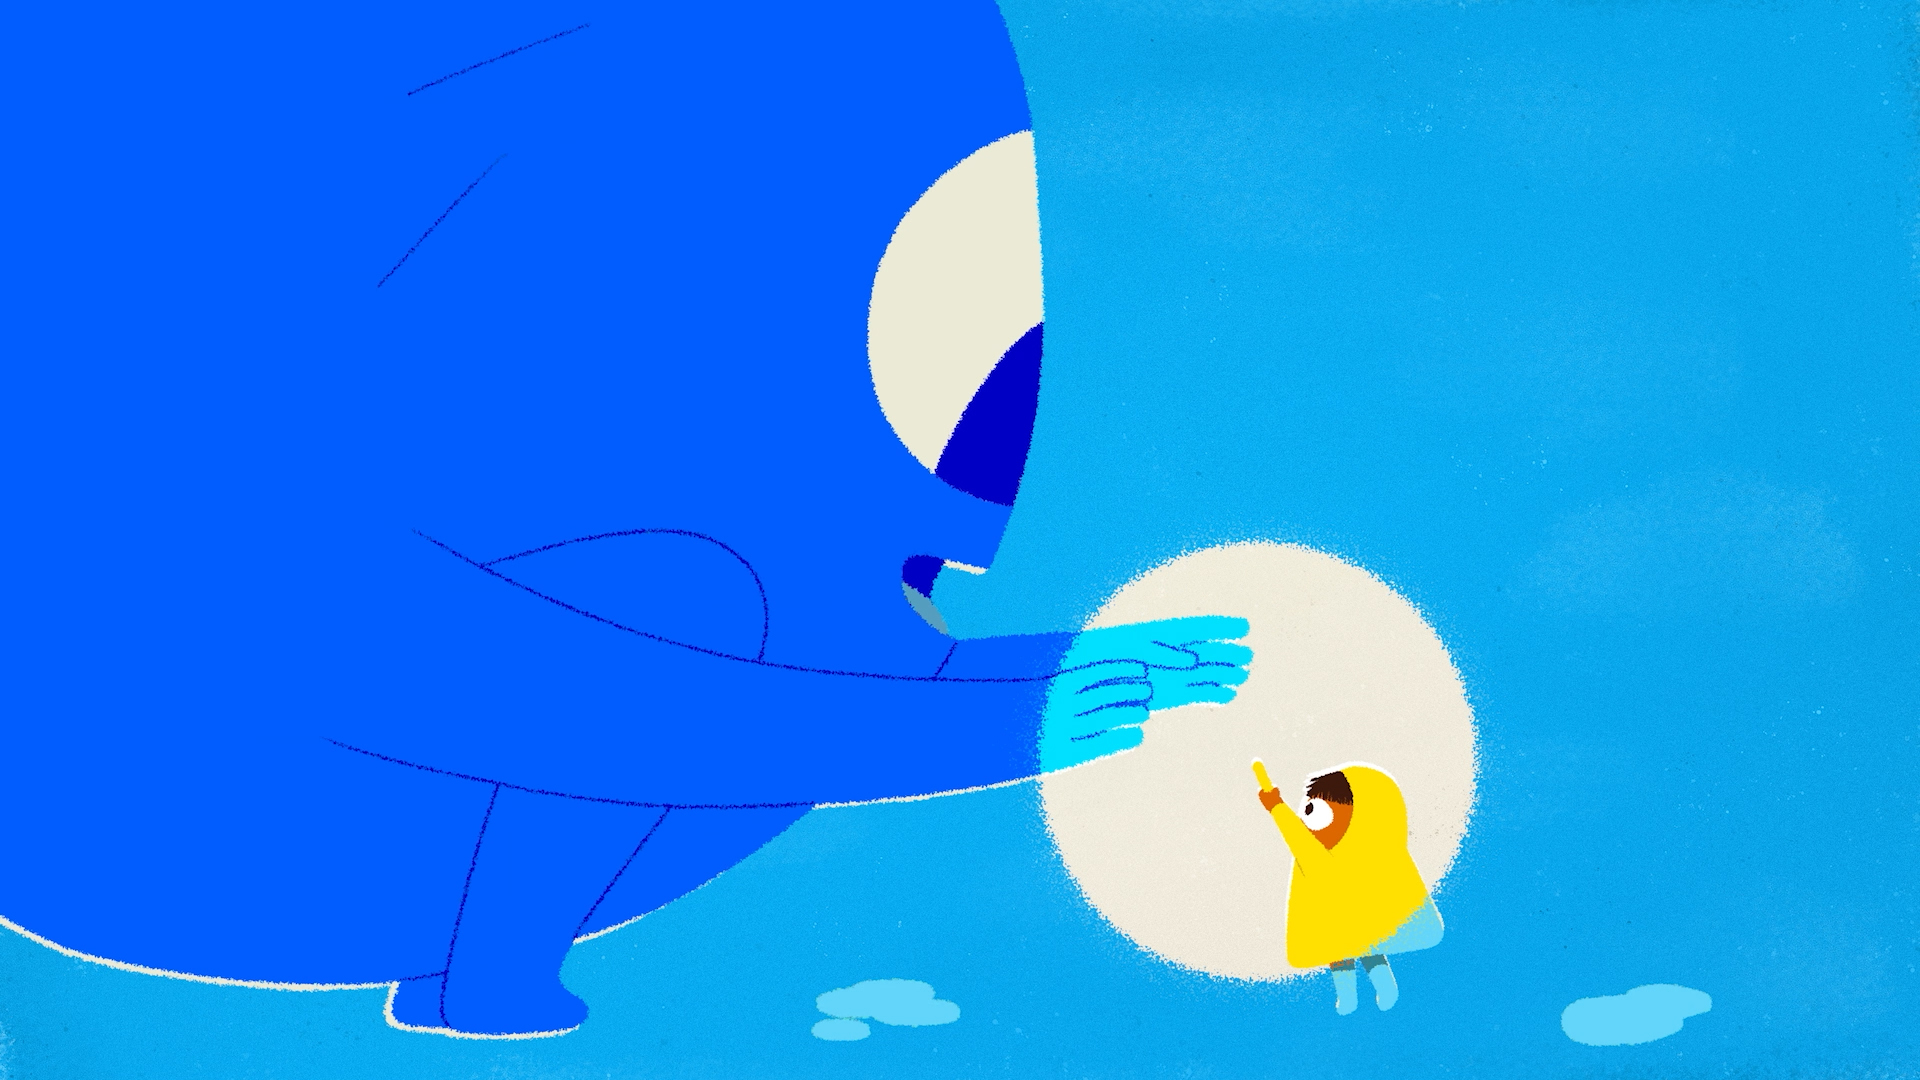 Still image from film with a large blue rock creature greeting a small child